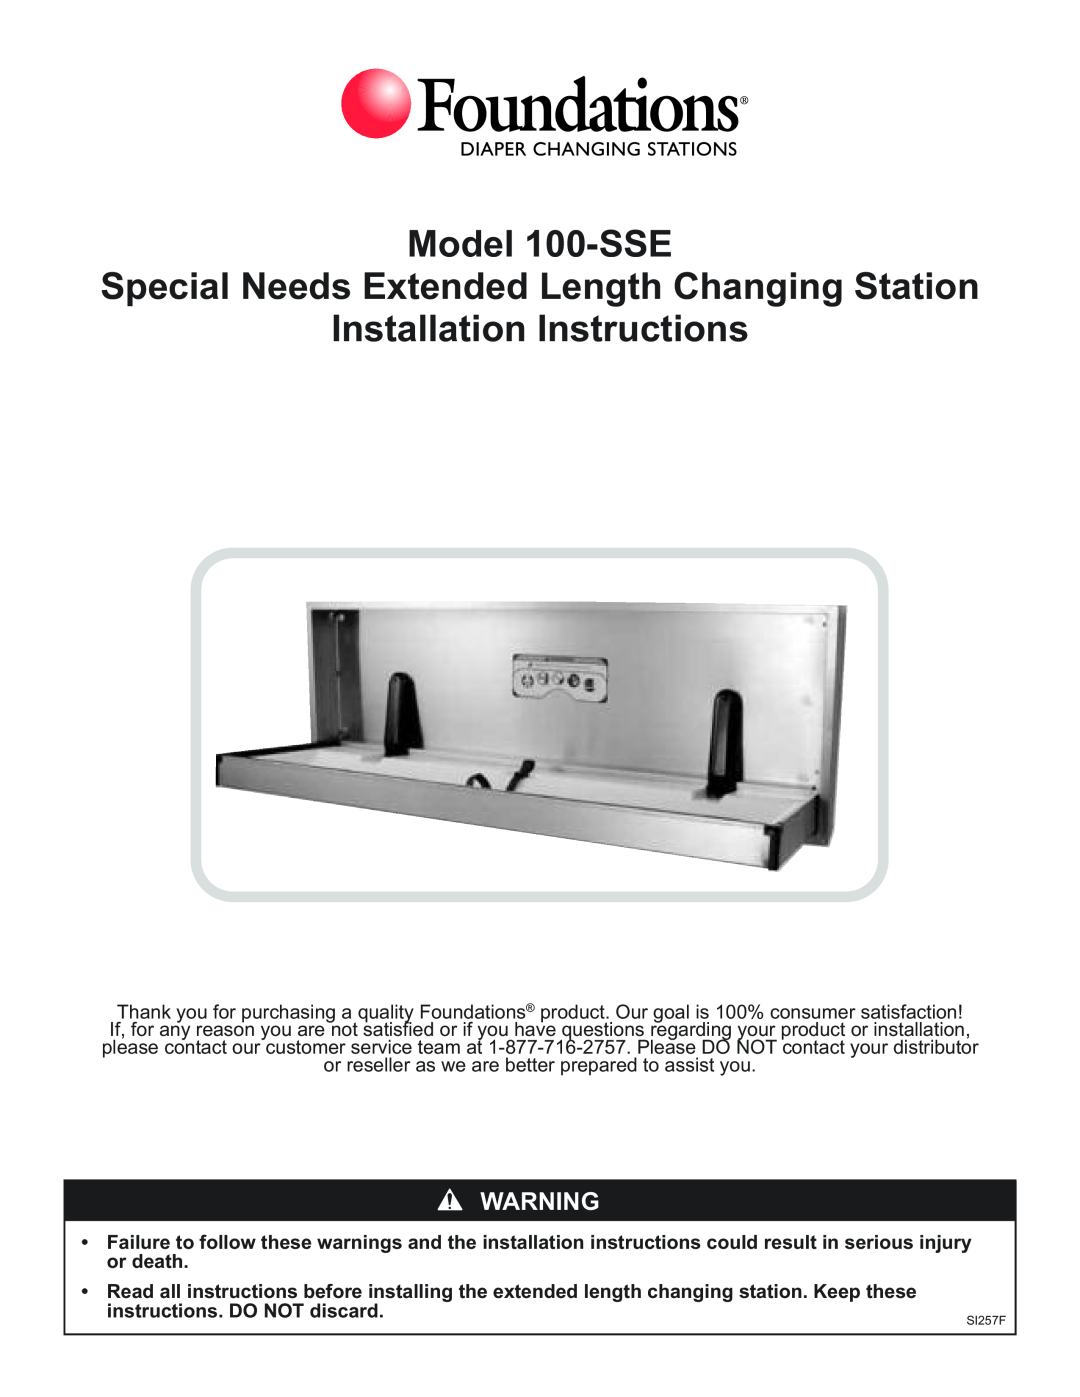 Foundations manual Model 100-SSE Special Needs Extended Length Changing Station, Installation Instructions 